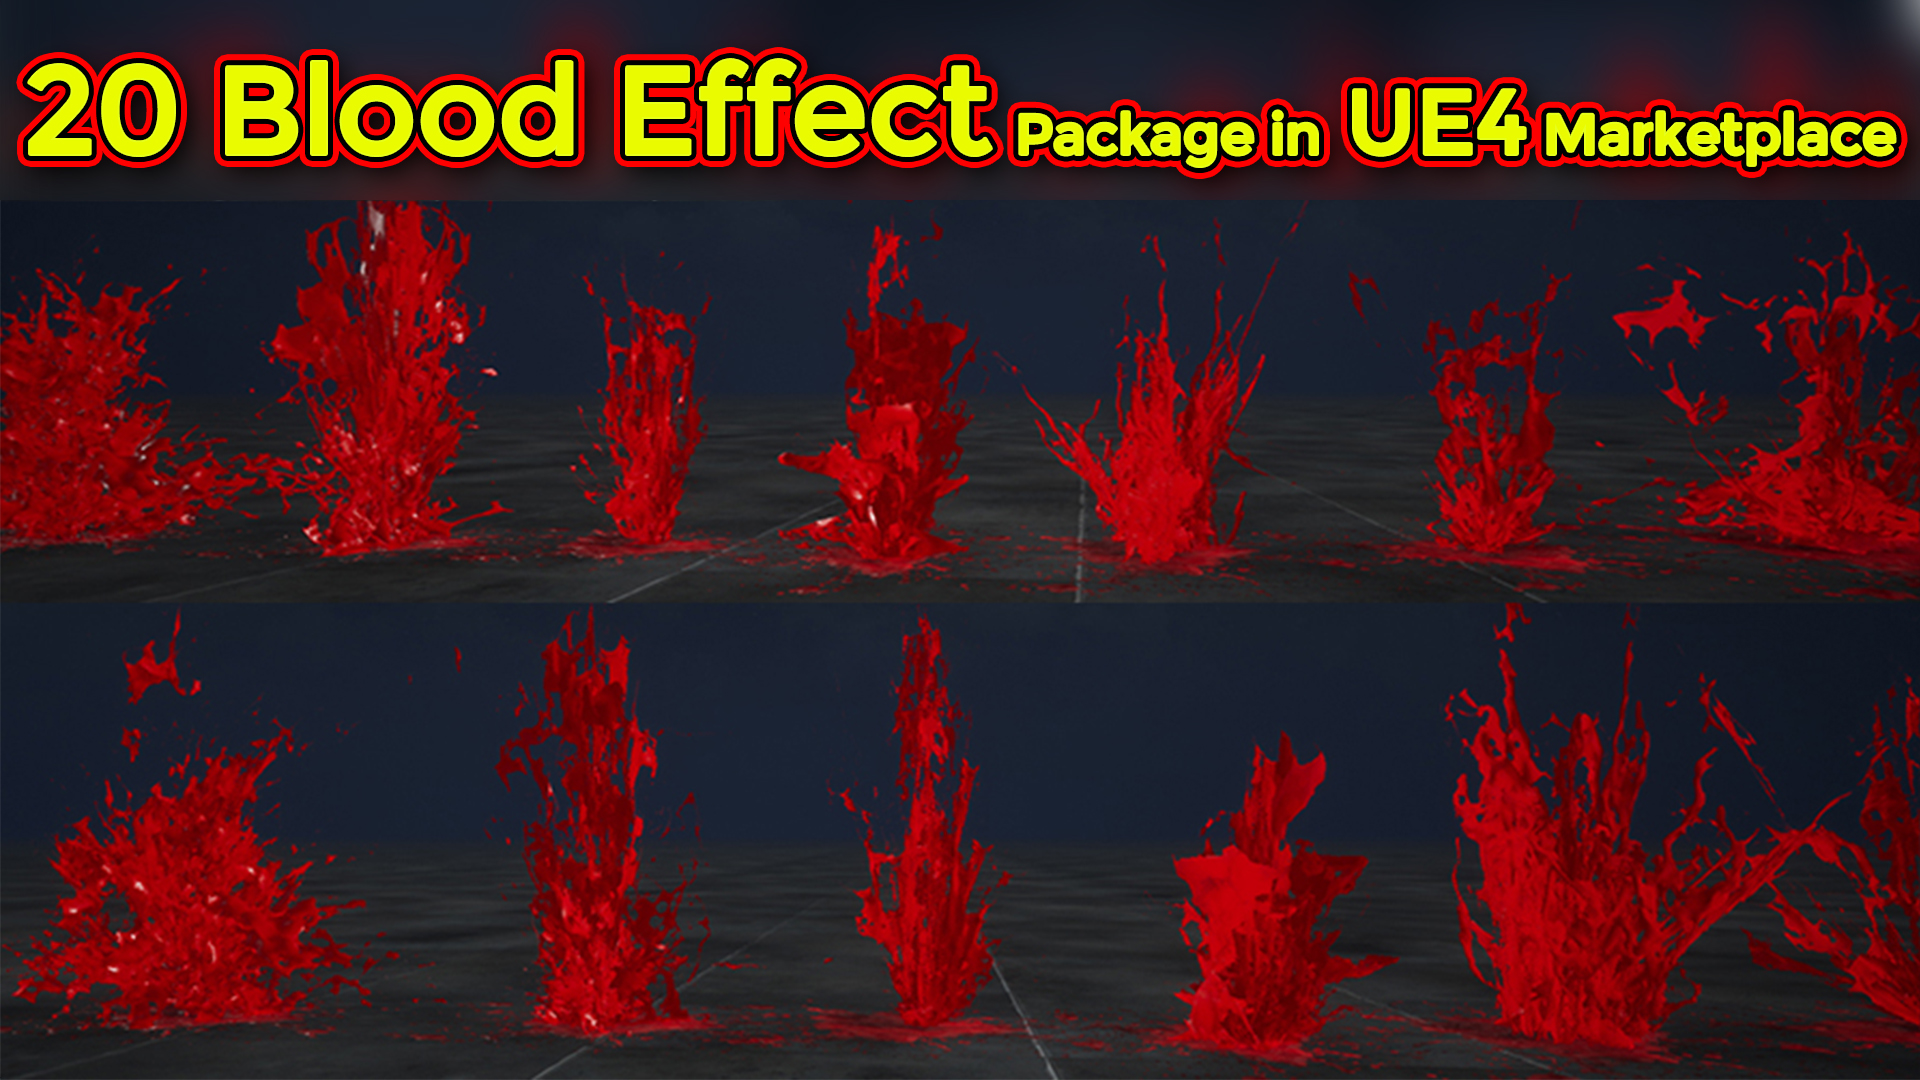 20 Blood Effect Package in UE4 Marketplace